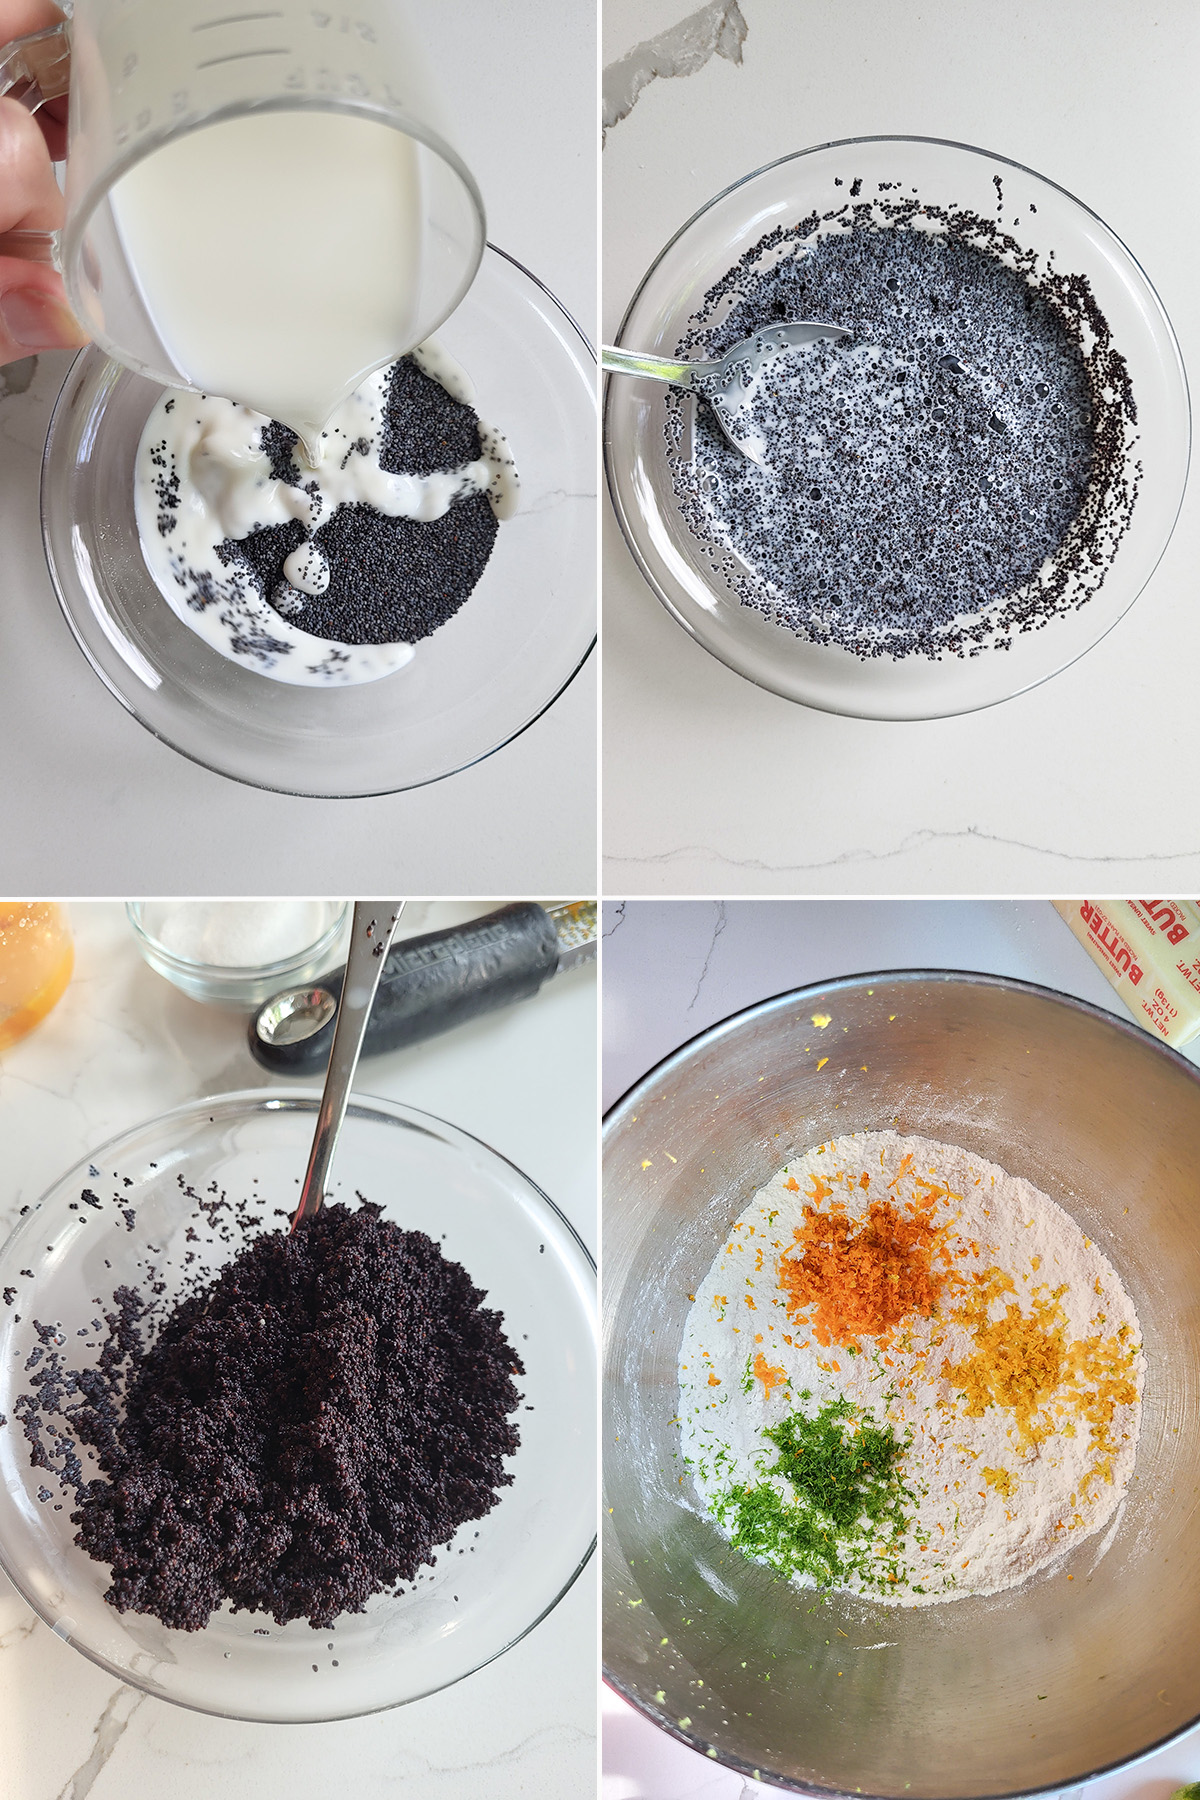 poppy seeds soaking in milk. Dry cake ingredients with citrus zest in a bowl.